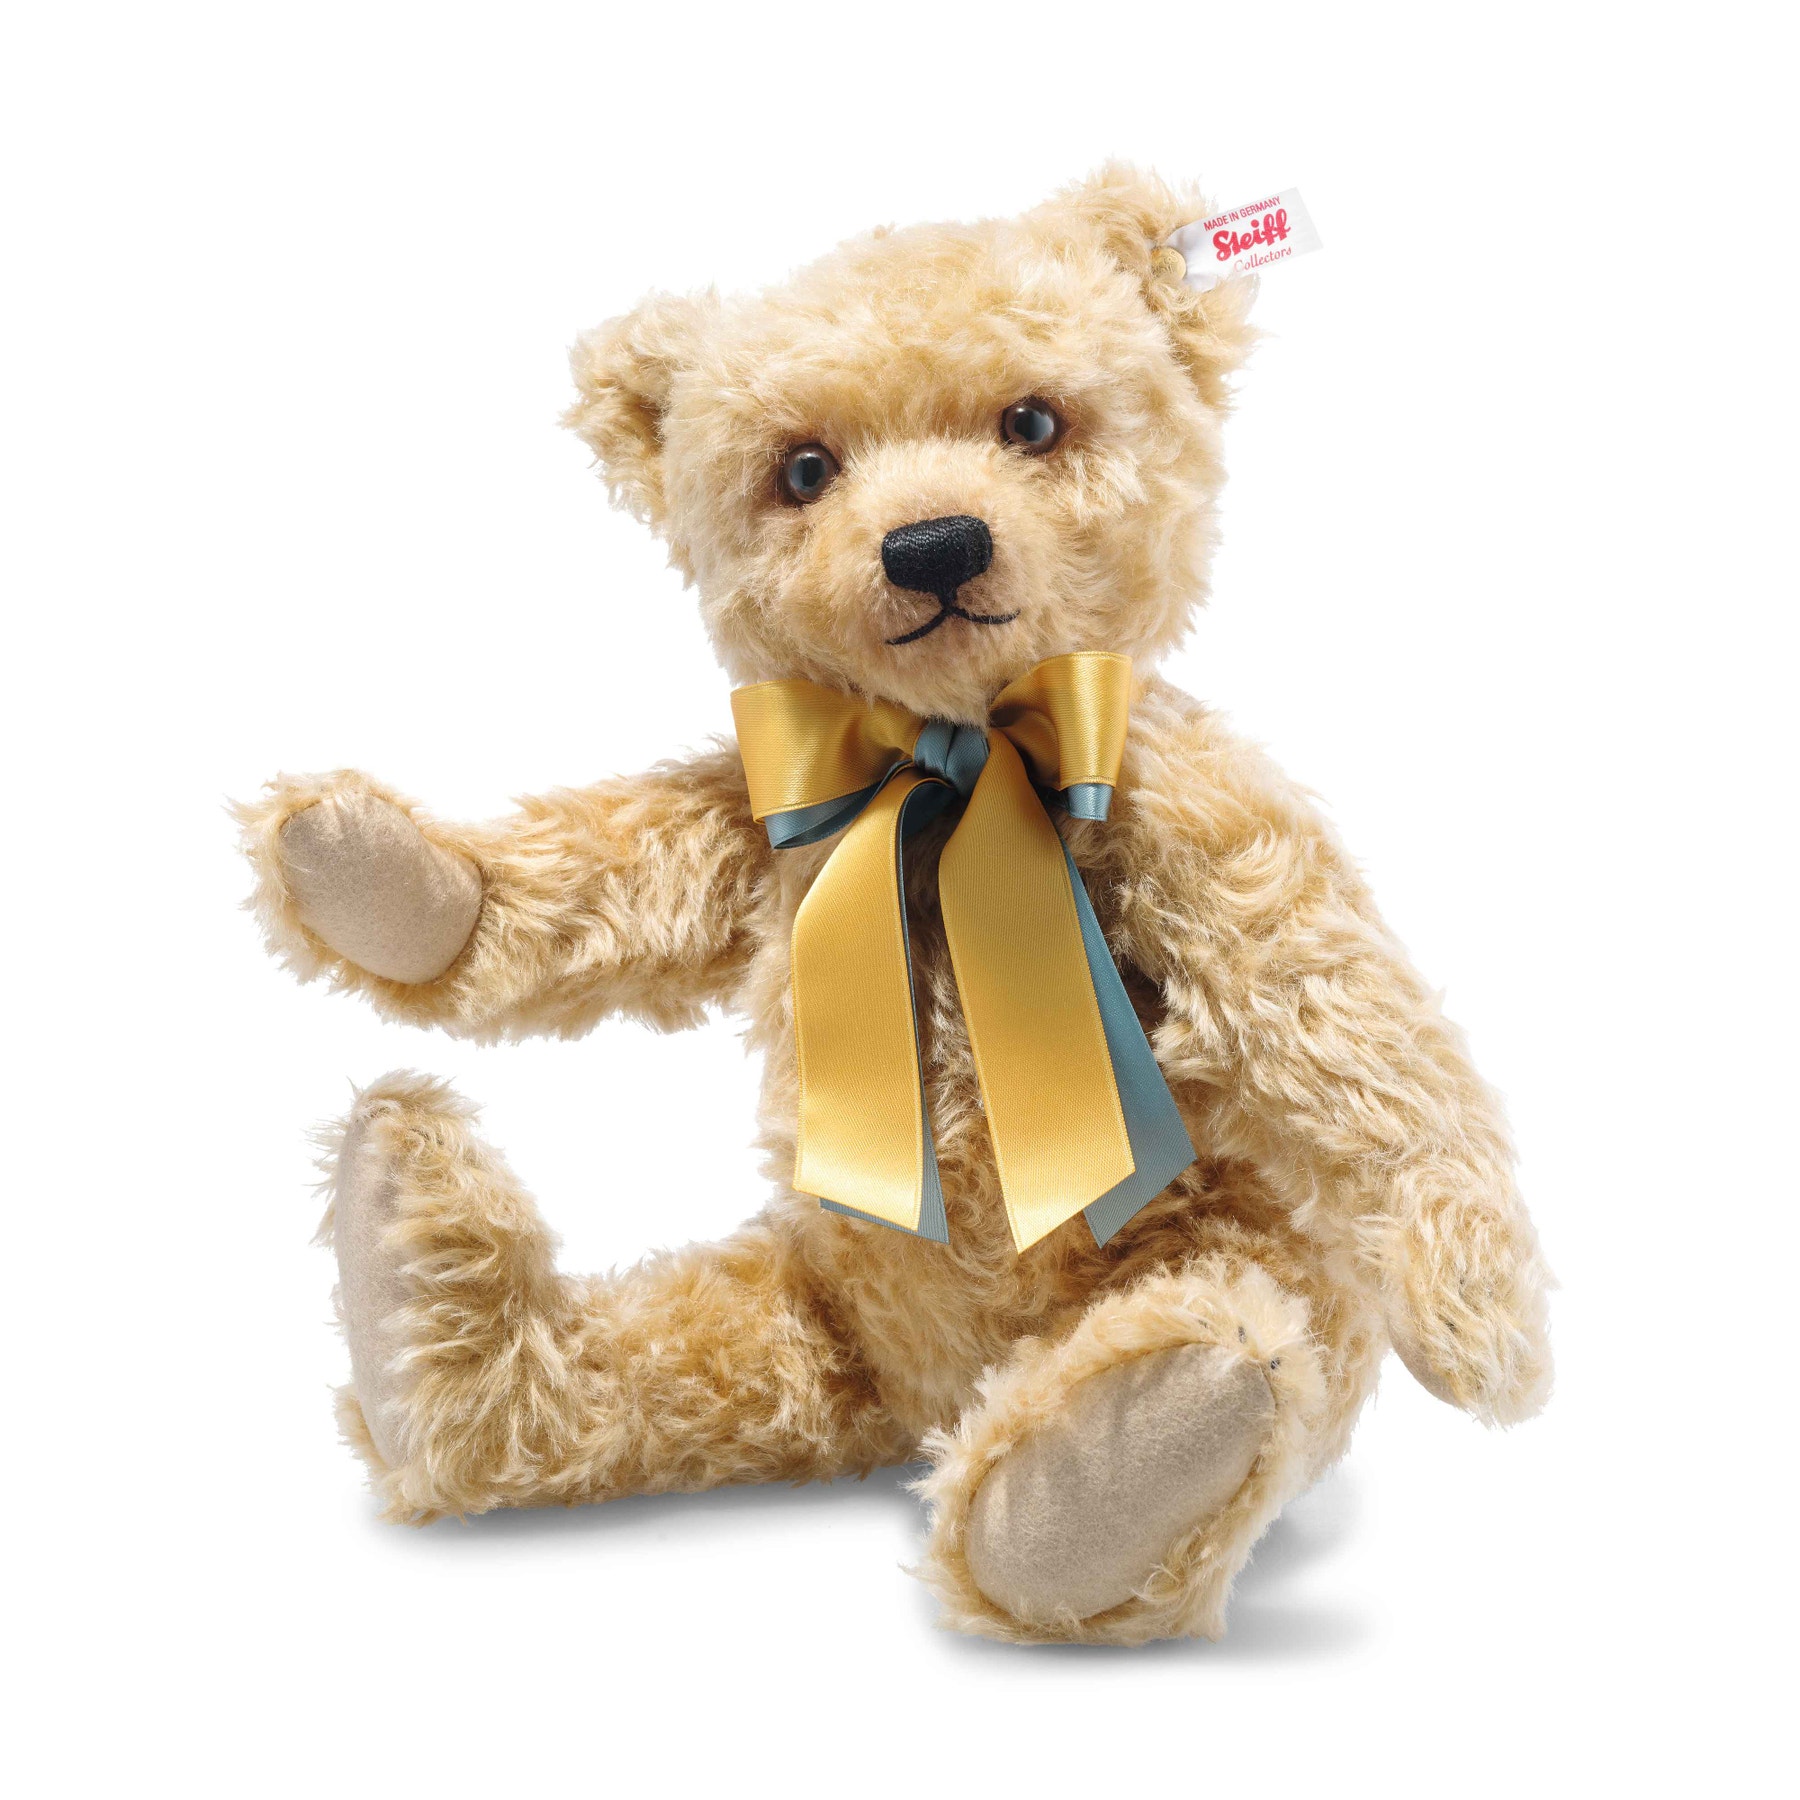 Ours Teddy British Collectors' 2020